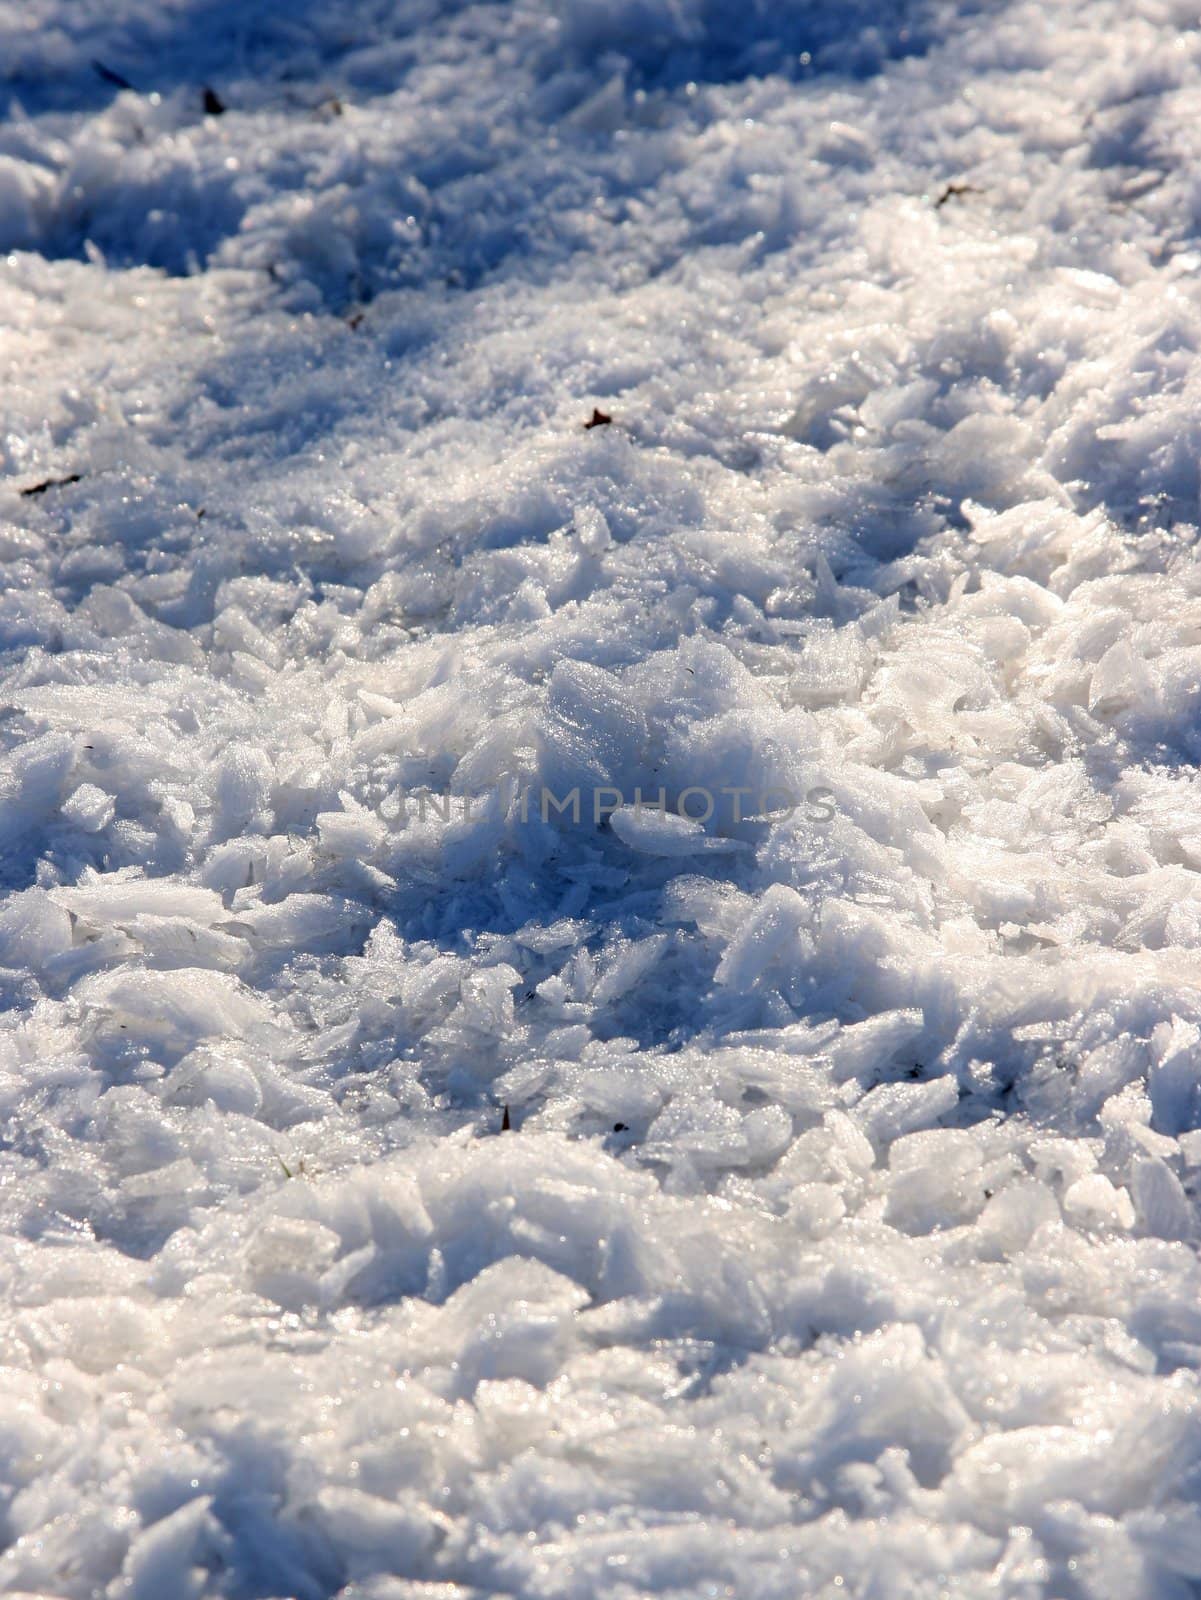 Pieces of ice covers the ground in winter